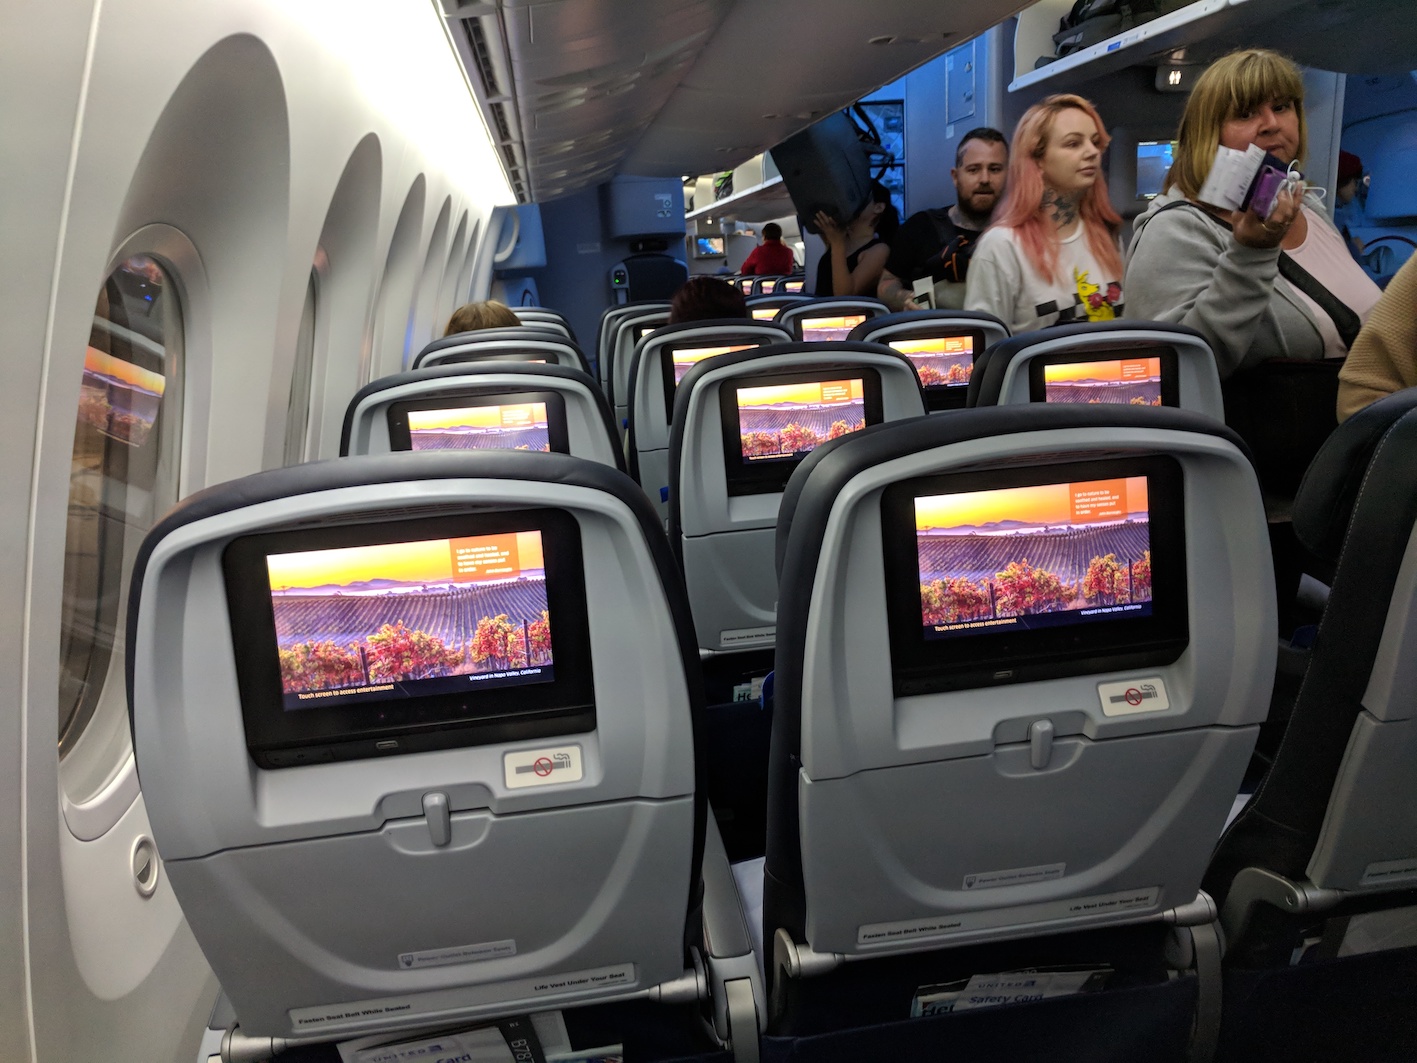 a group of people on an airplane with a television screen